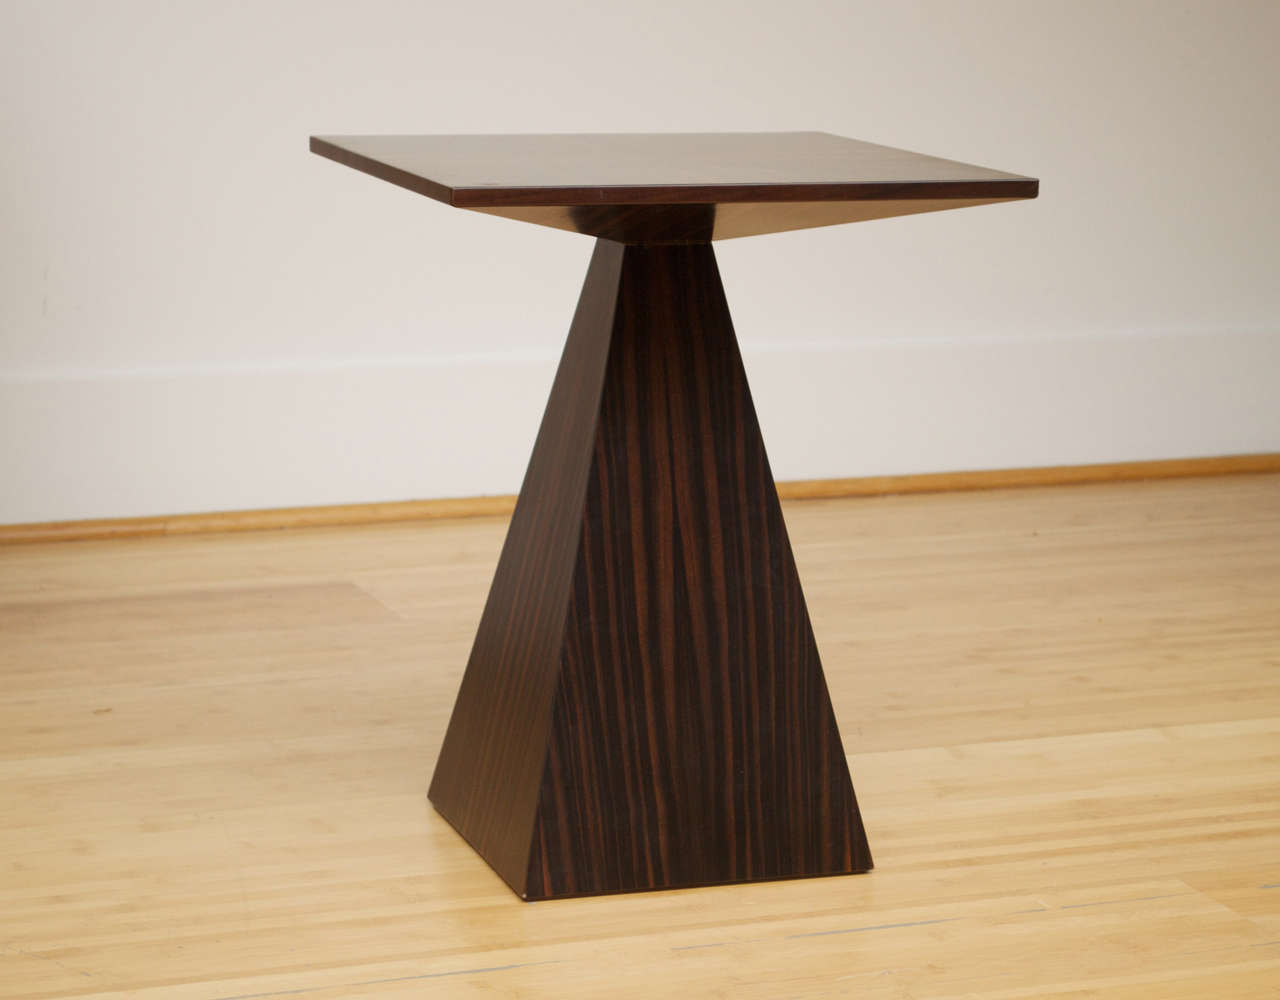 Extremely rare Harvey Probber end table in wenge.